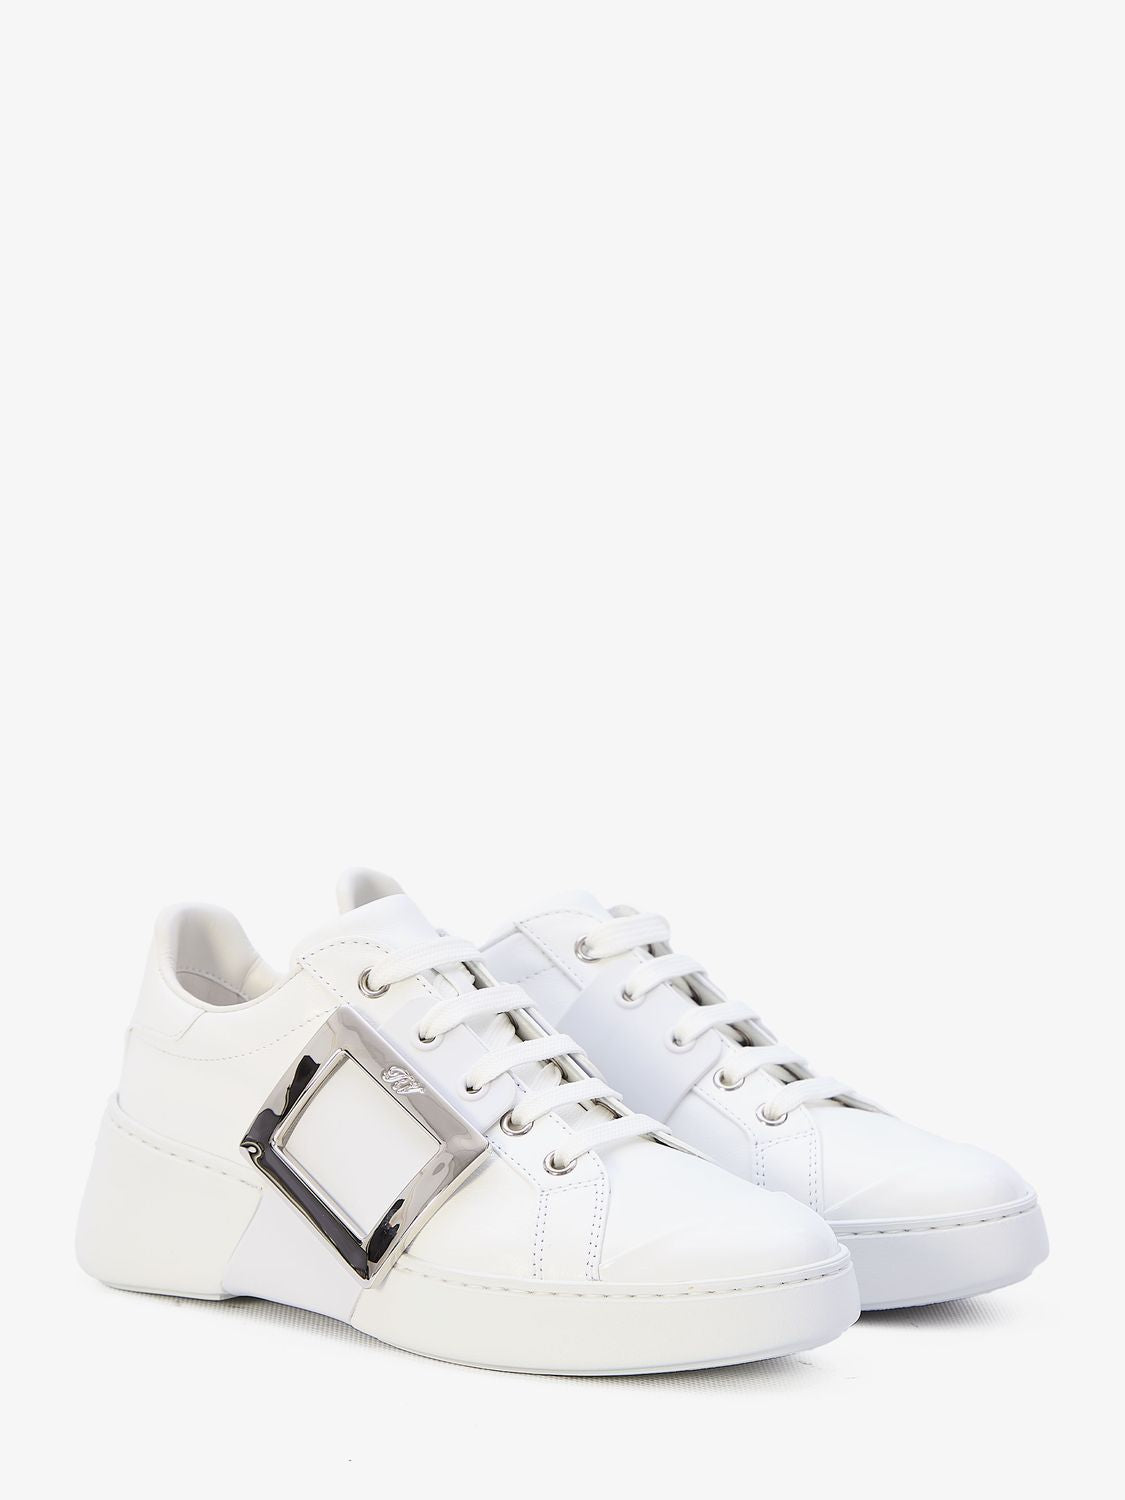 ROGER VIVIER White Leather Sneakers with Square Metal Buckle for Women